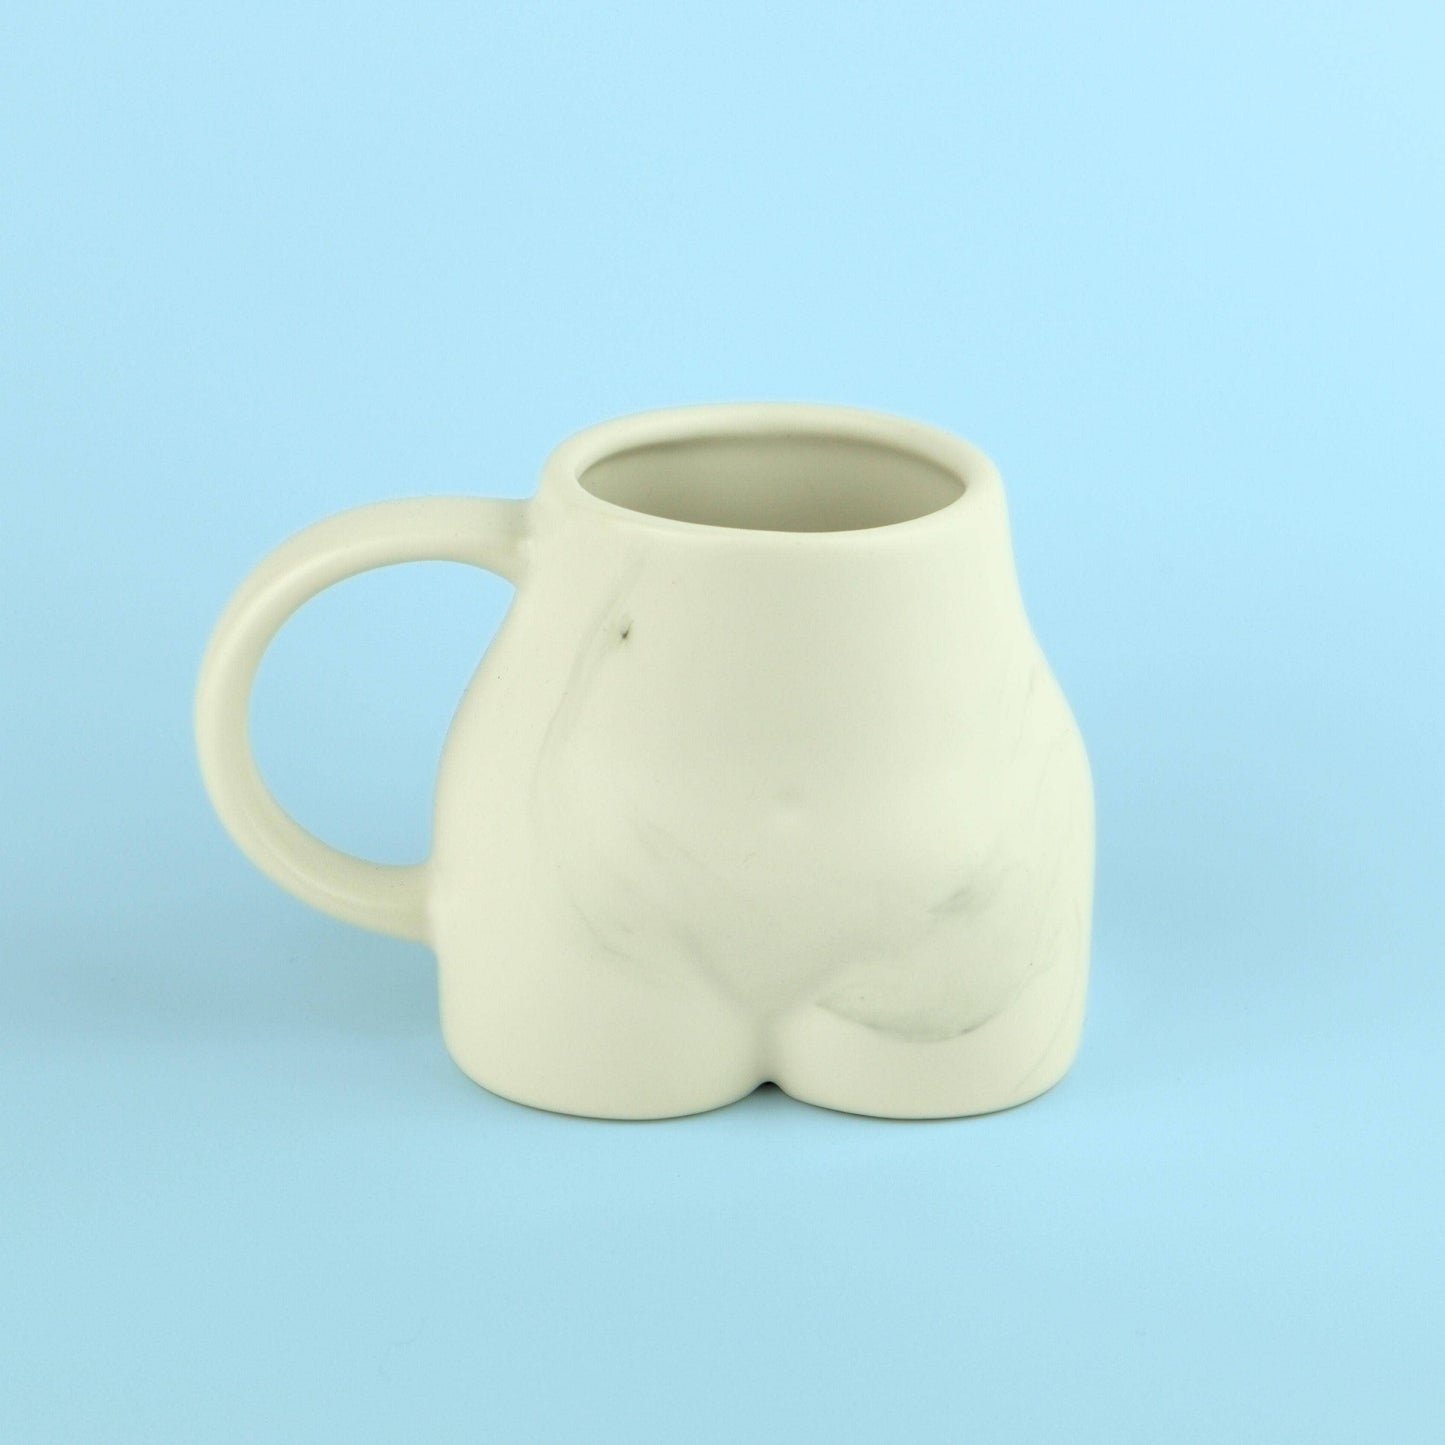 Body Butt Shaped - Mug (5 different color options): Teal